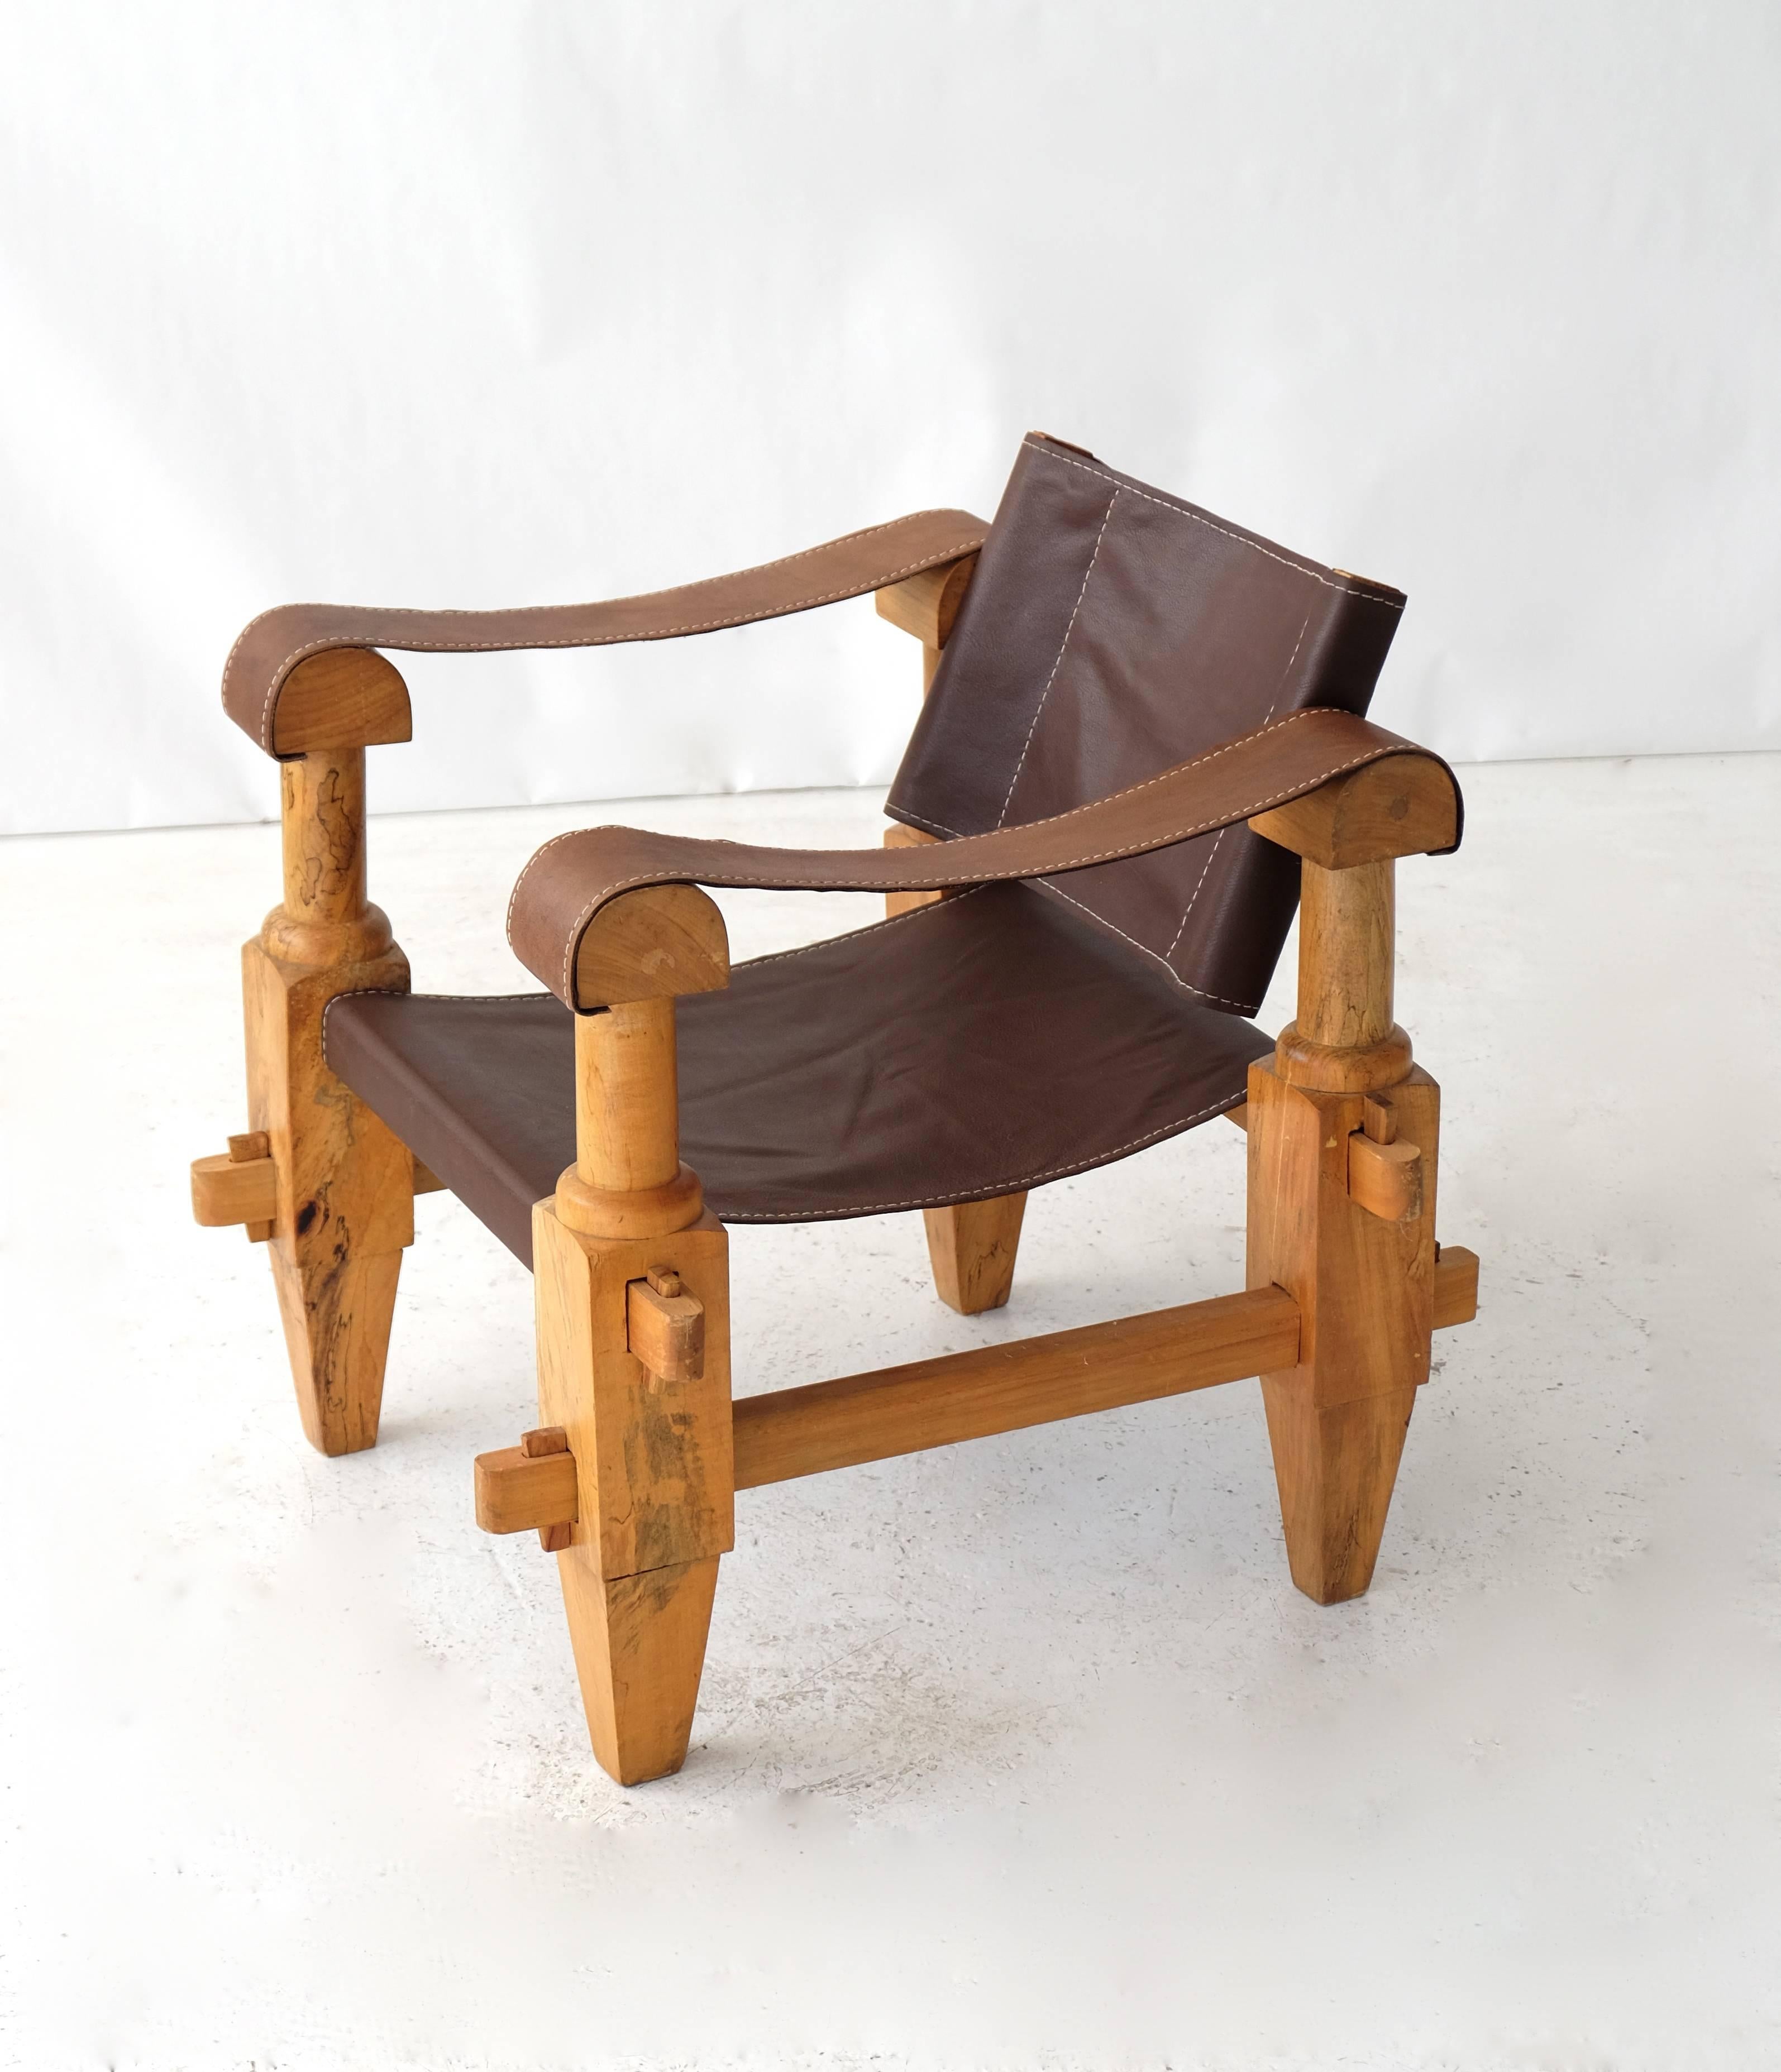 Unique Mexican hand-carved Campaign chairs made of olive wood.
New leather seat and back.